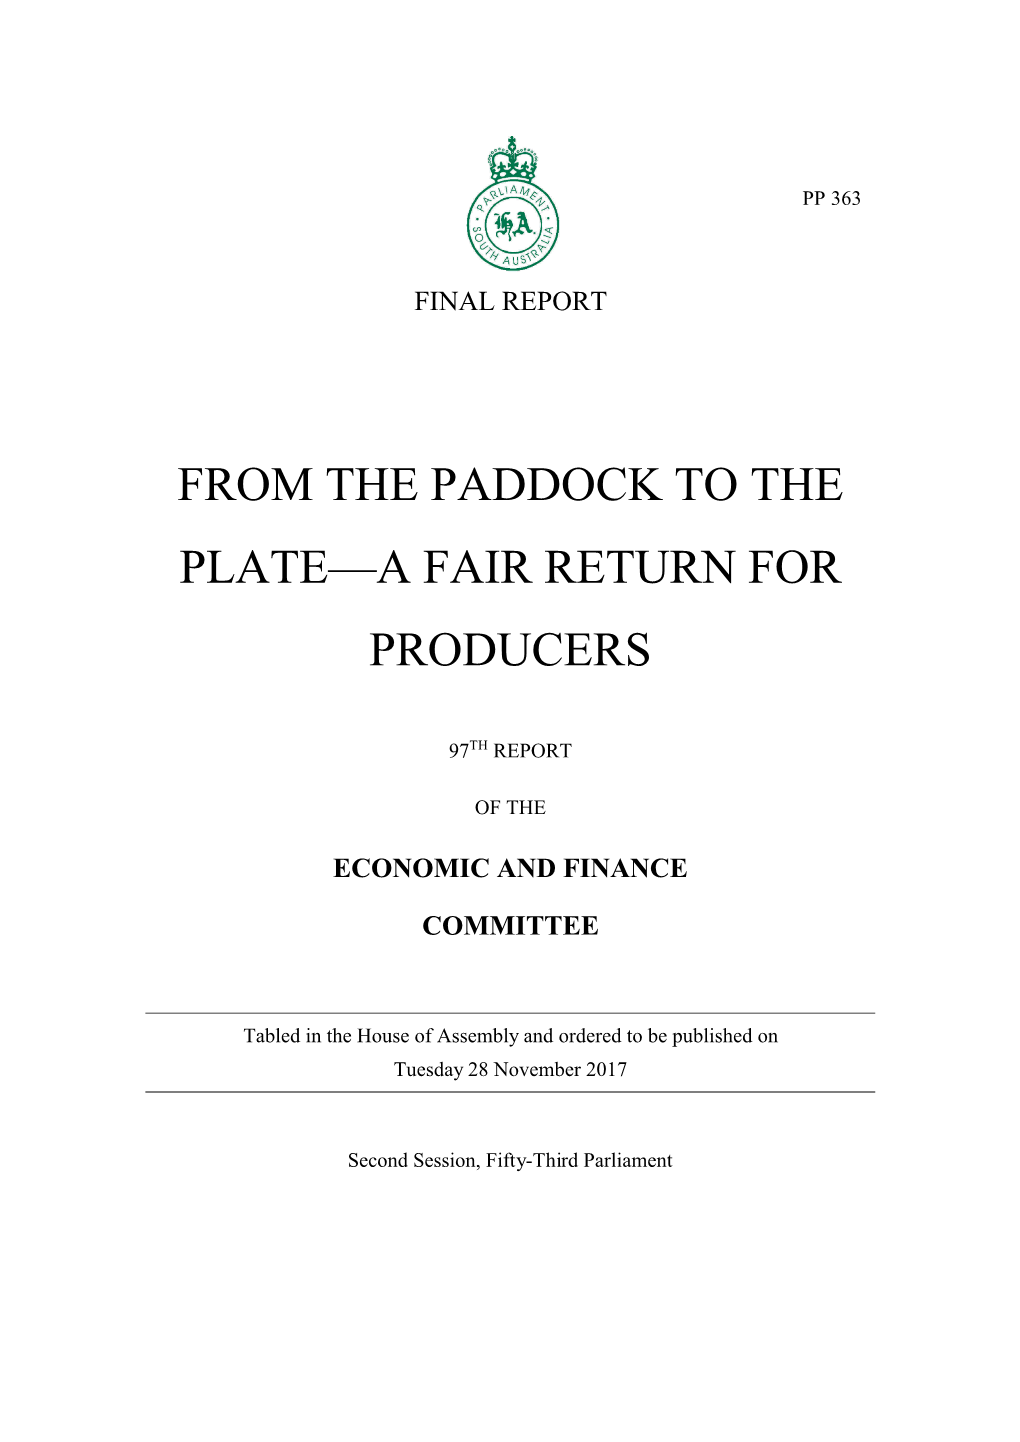 From the Paddock to the Plate—A Fair Return for Producers